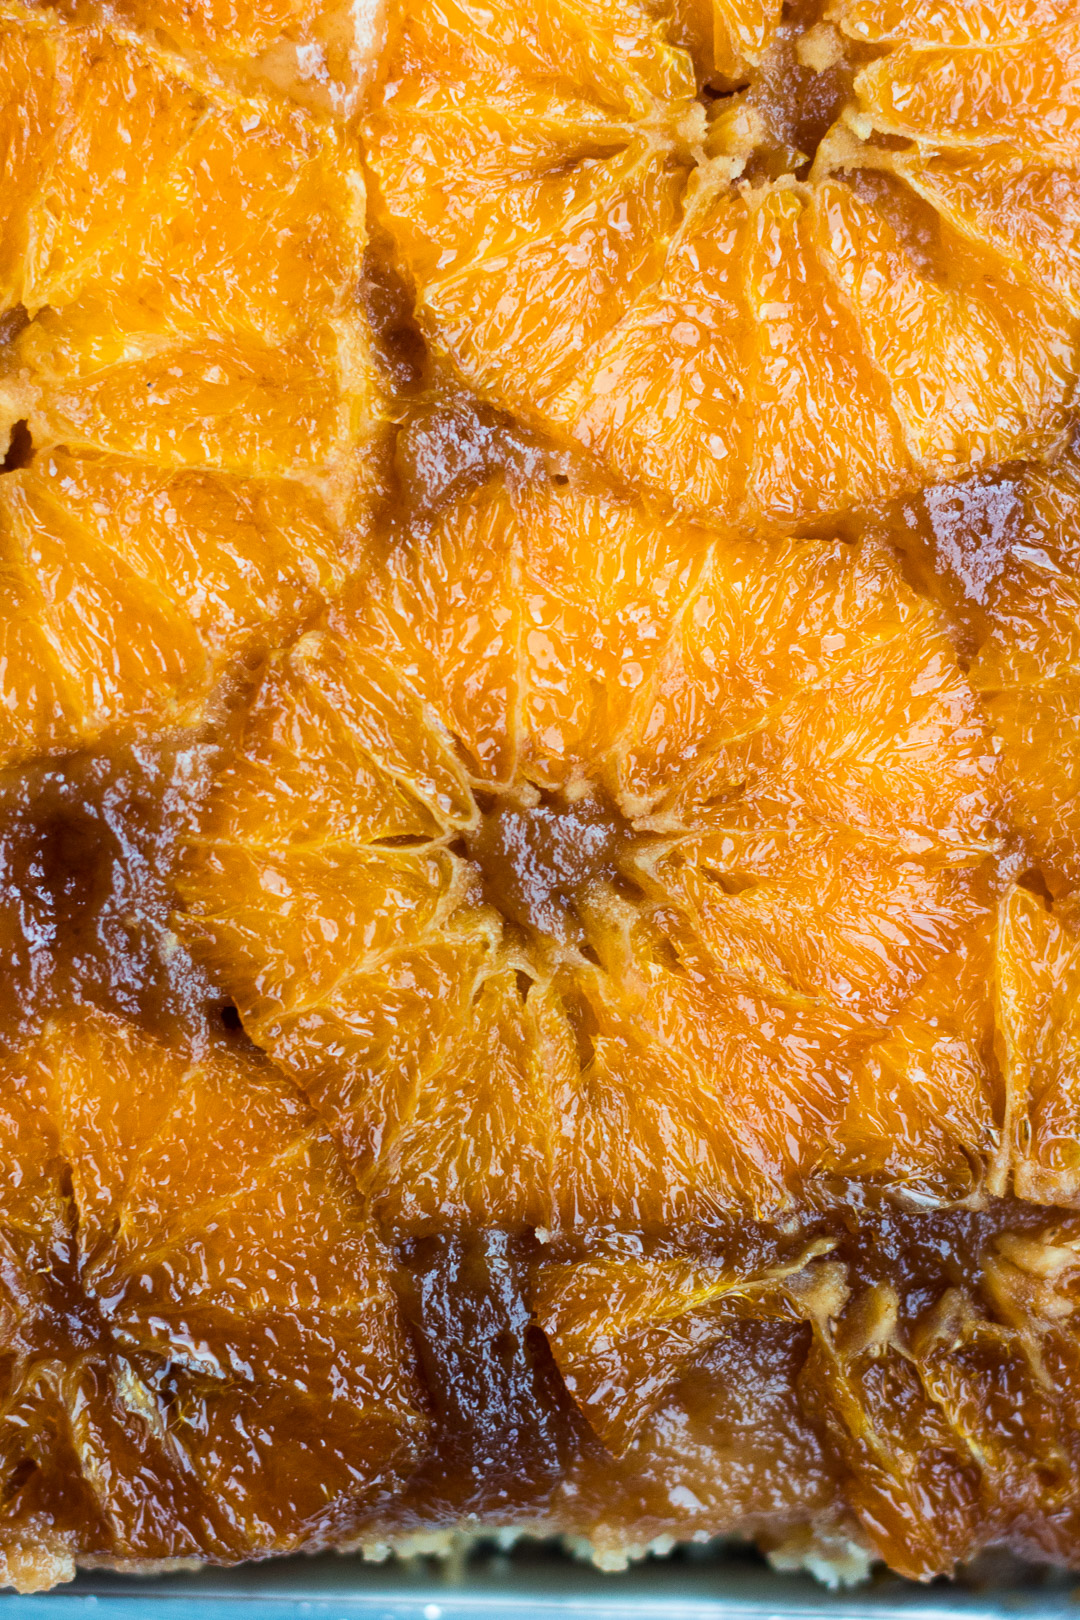 Close up overhead shot of the unglazed oranges on the upside down cake.